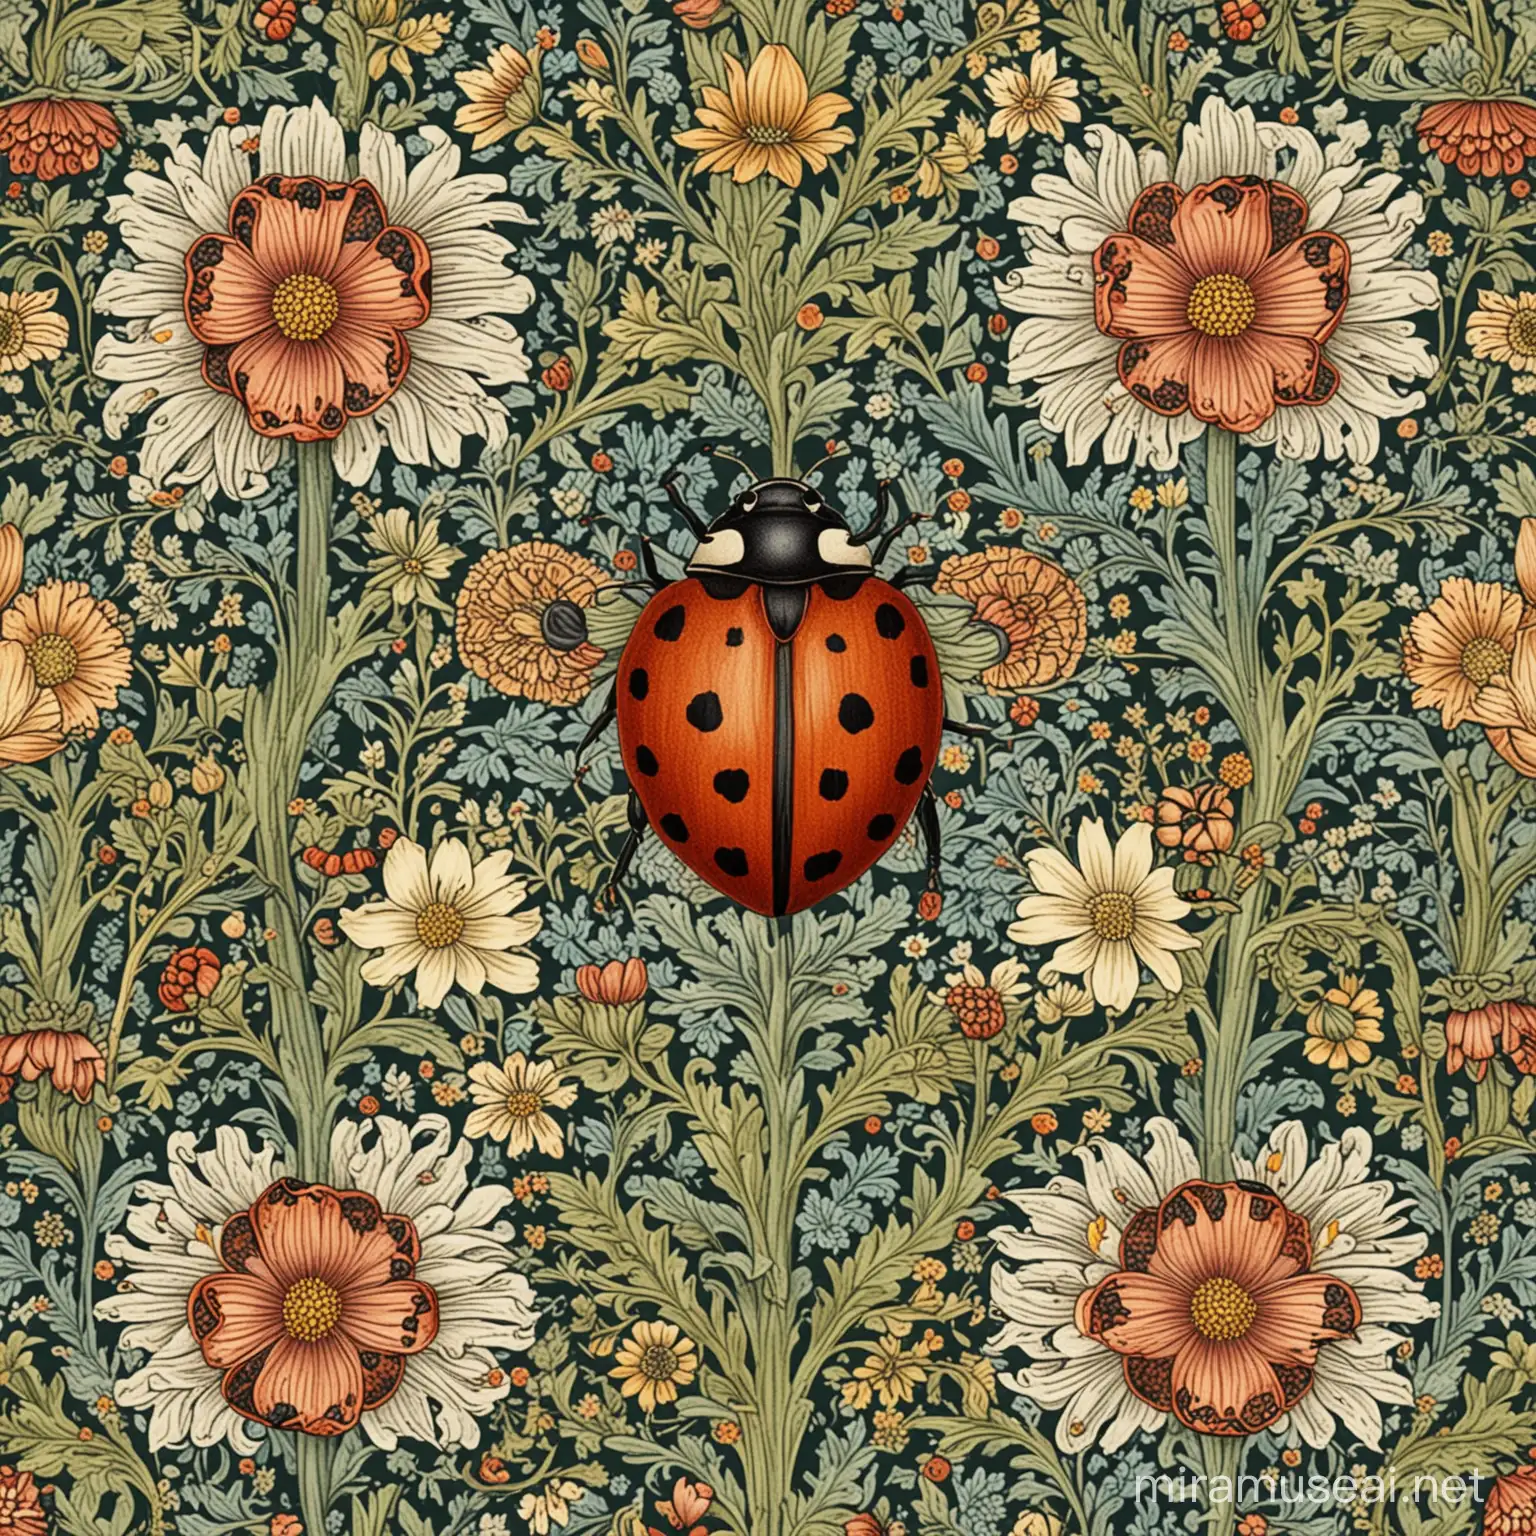 Floral William Morris Style Design with Ladybug Accent